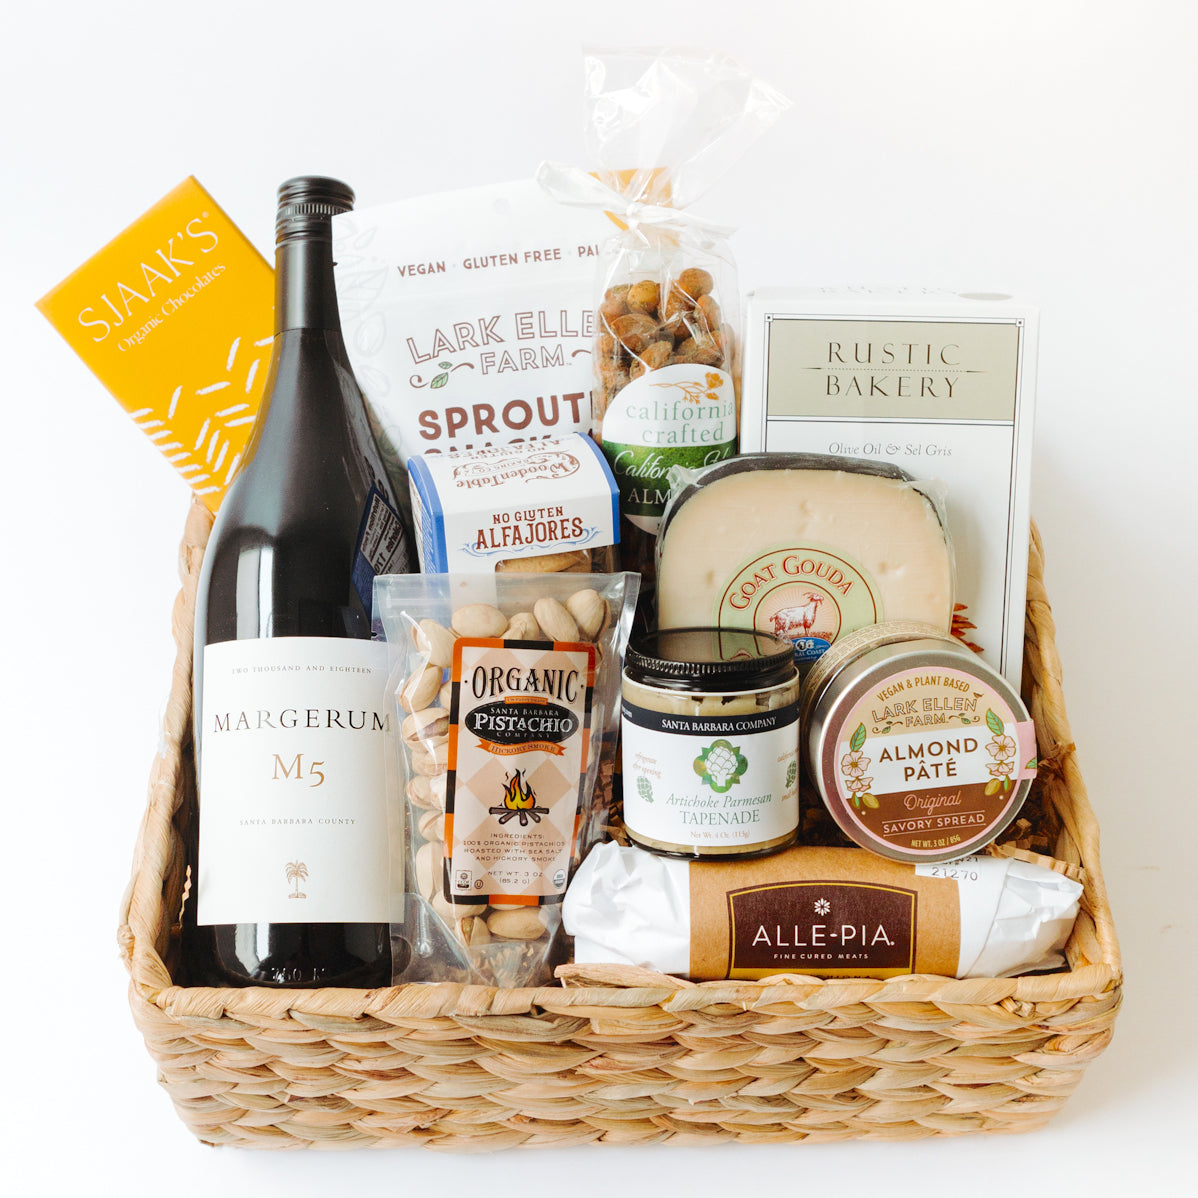 Basket filled with wine, granola, almonds, sourdough bites, cheese, pistachios, salame, tapenade, and pate.